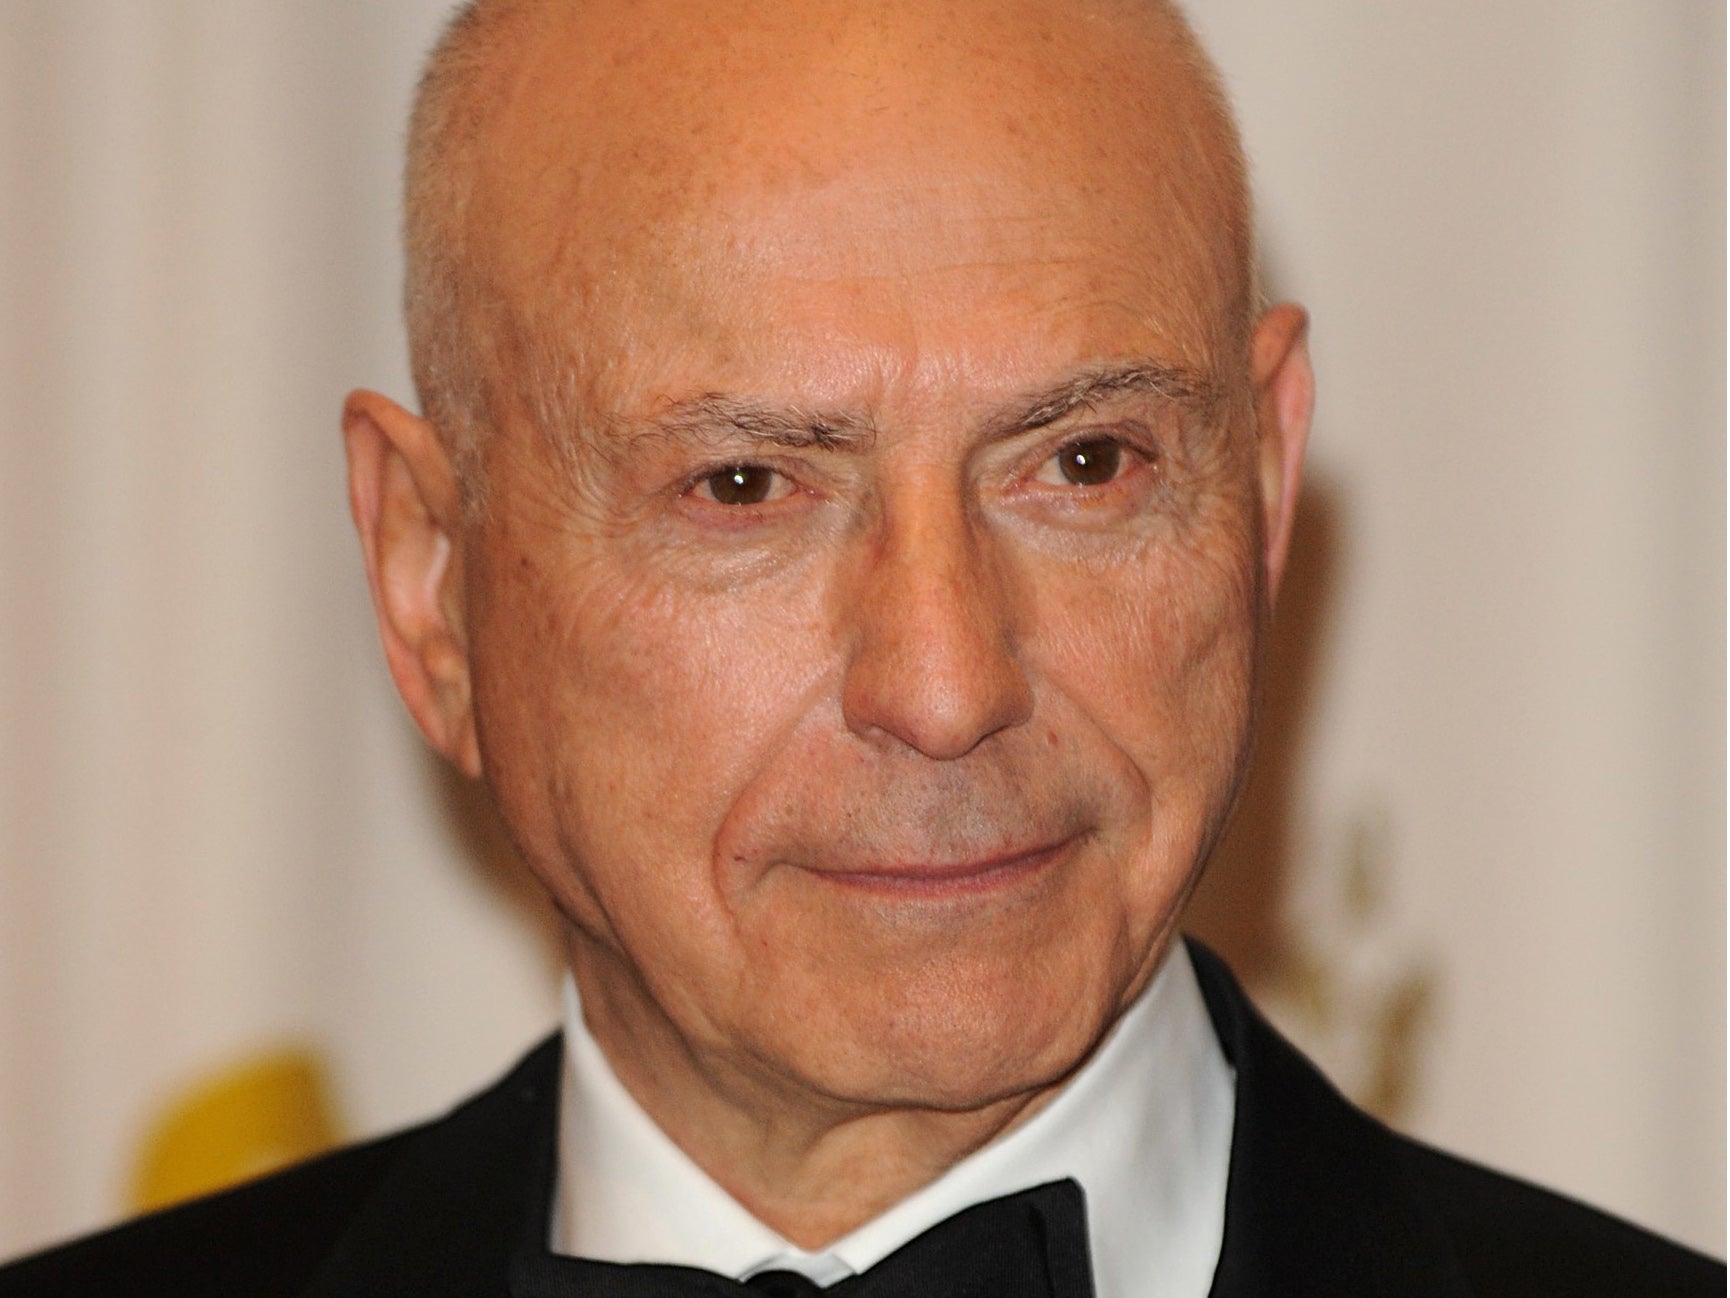 Alan Arkin appeared in dozens of hit films and TV shows during a career that spanned seven decades